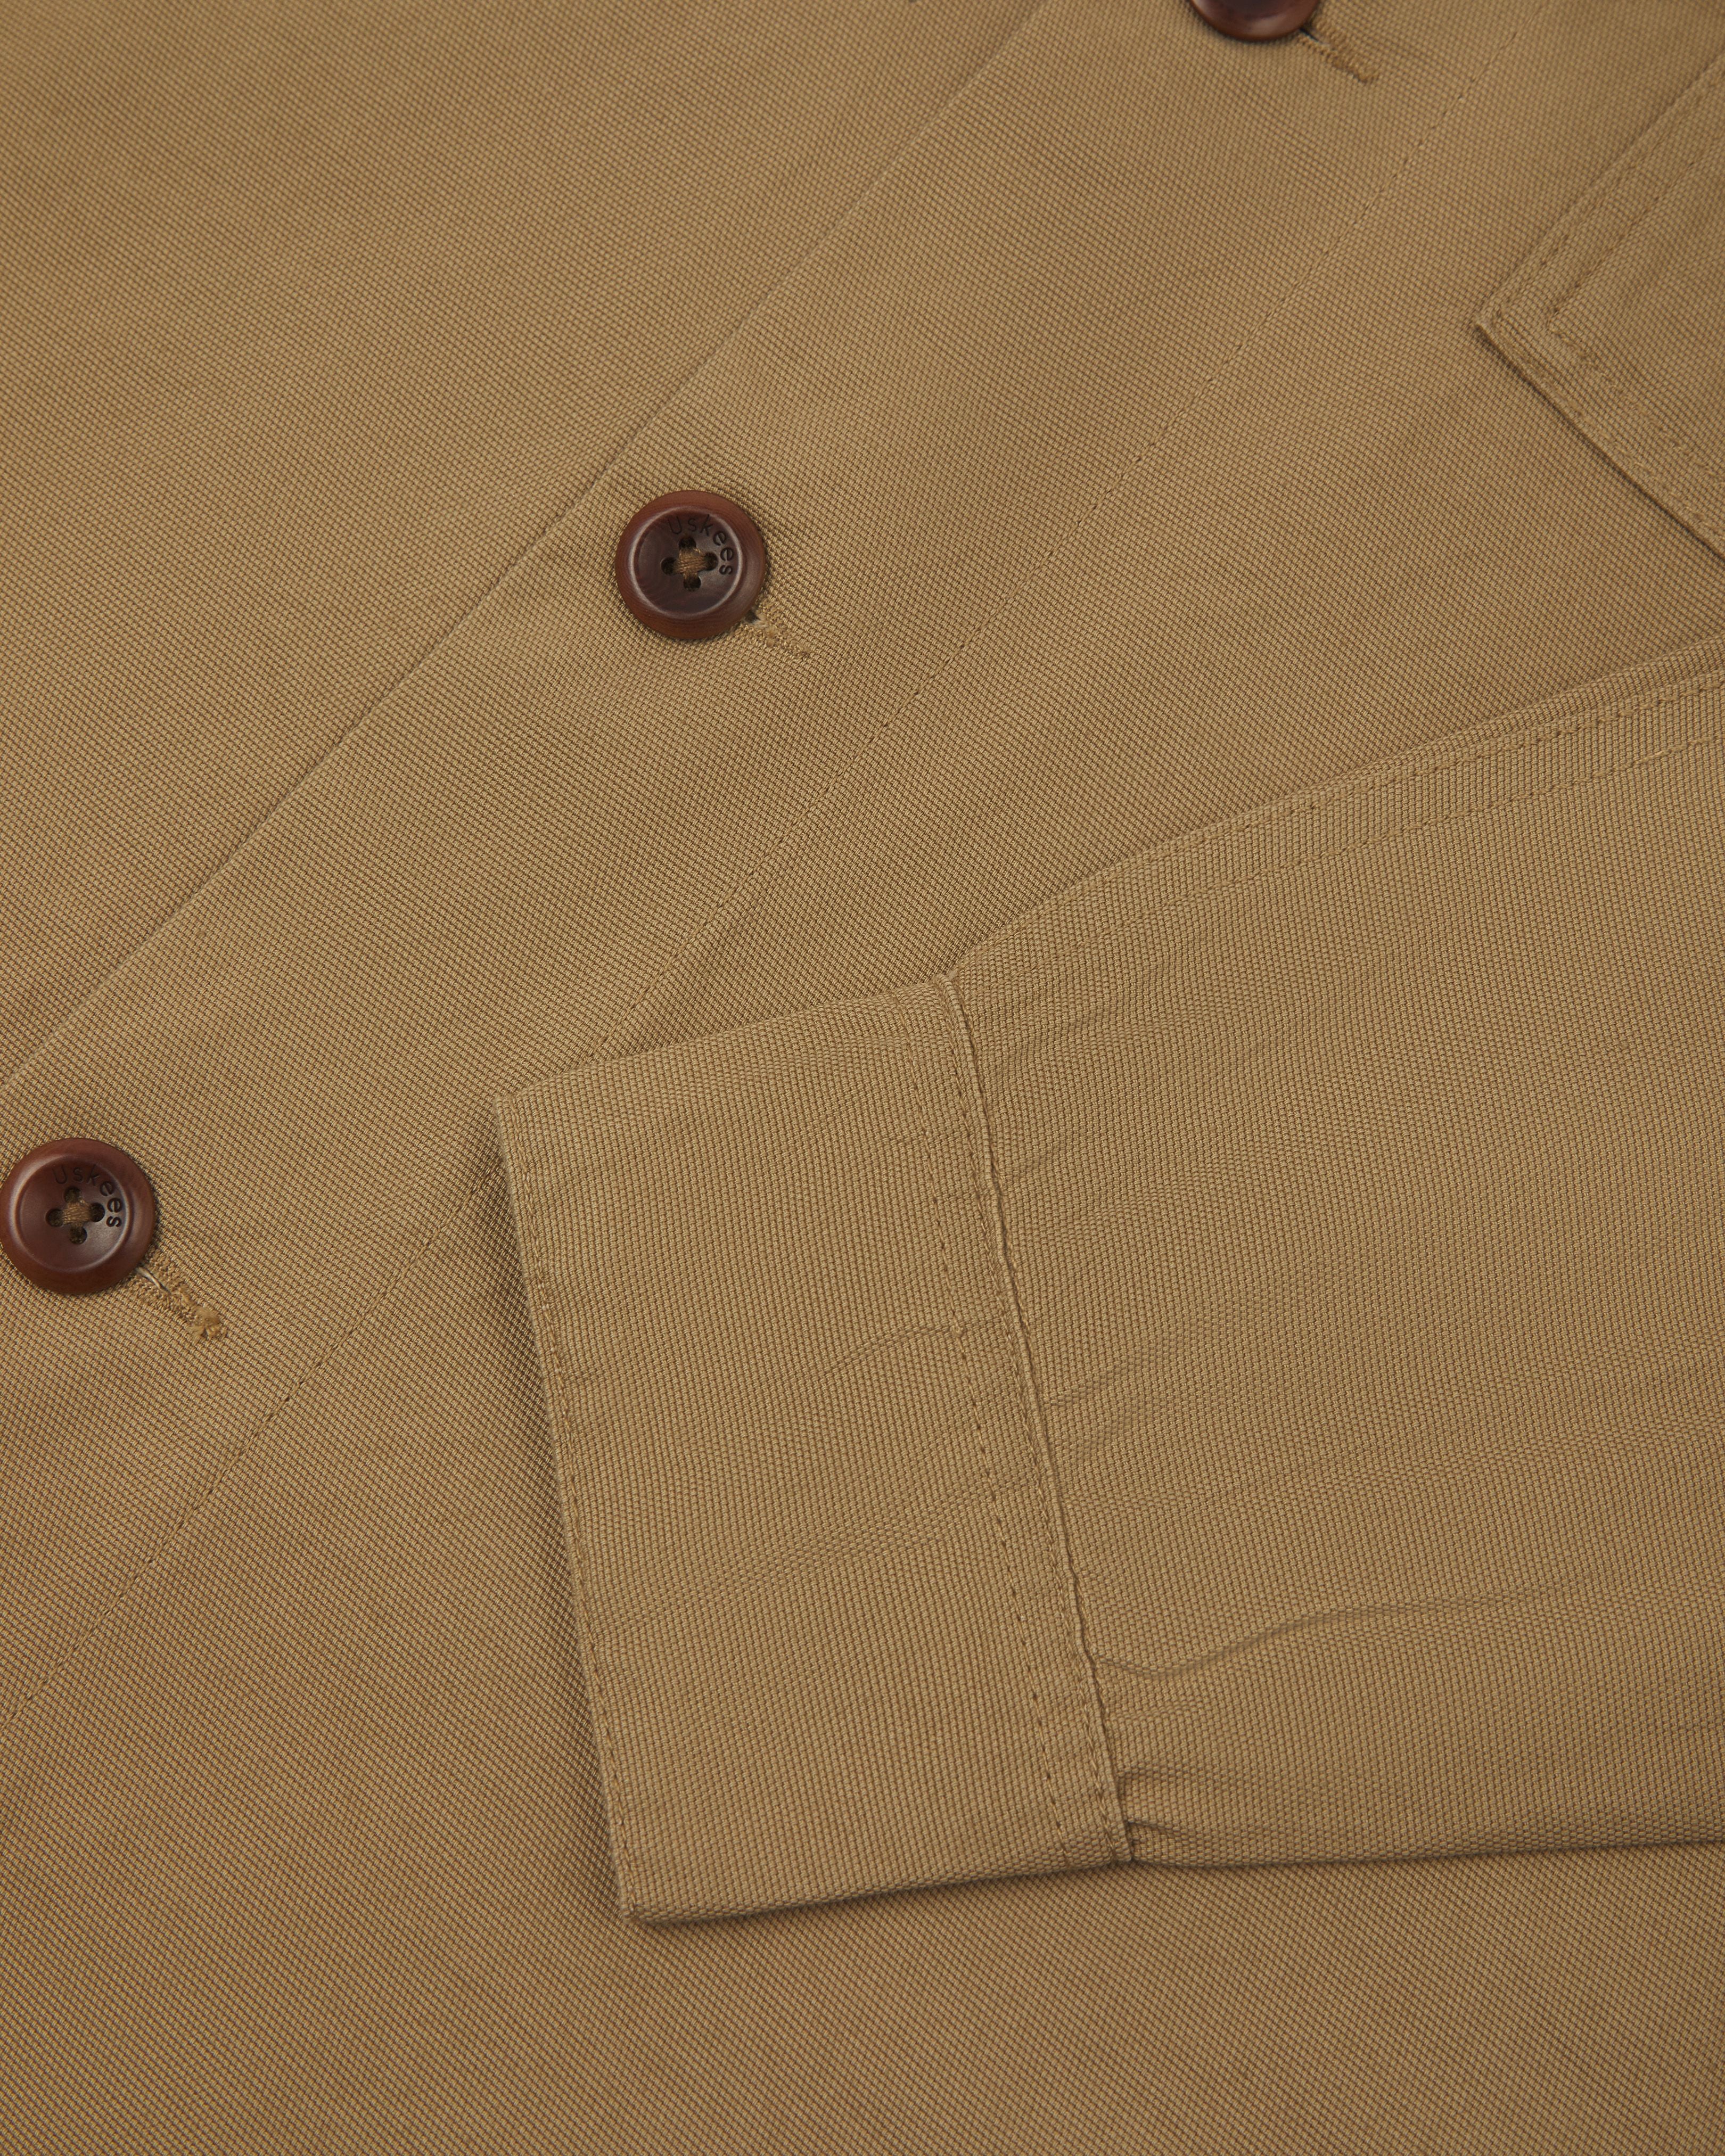 Close-up view of khaki buttoned 3003 workshirt for men from Uskees, showing sleeve and corozo button detail.